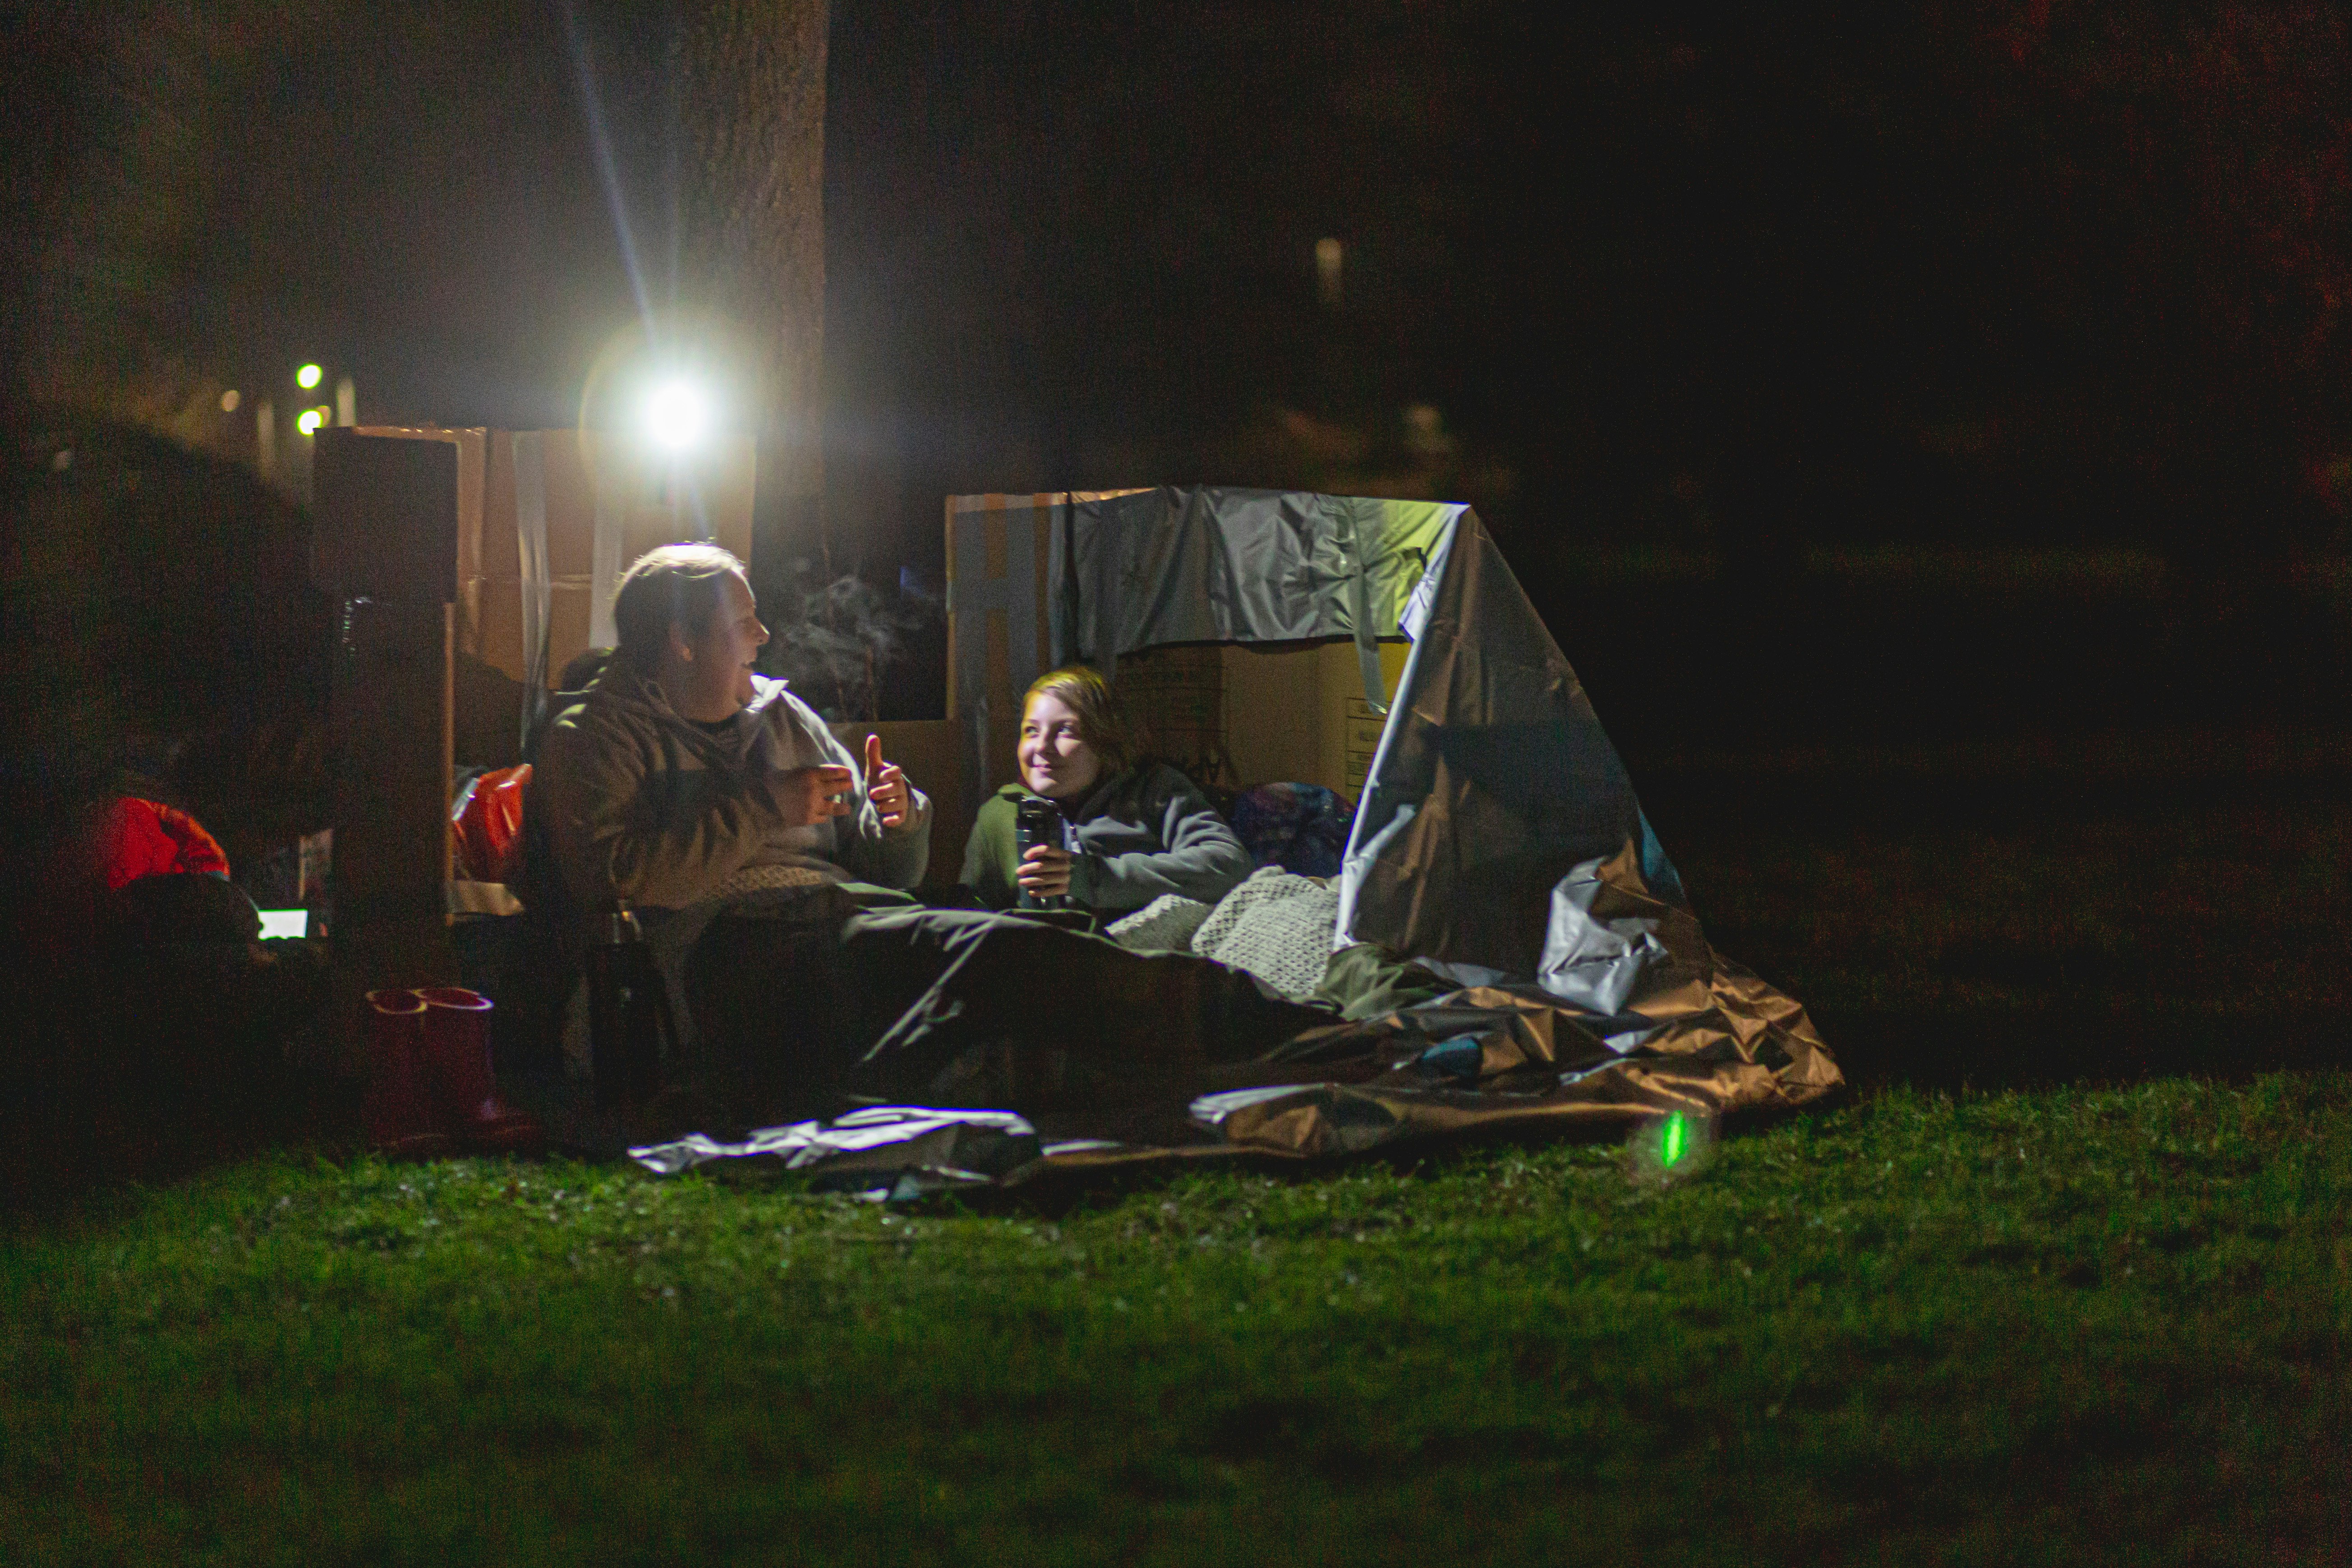 A tent with a man and a child sat together, in the dark outside of a tent. They are huddled in sleeping bags. There is a bright spot light over their heads.